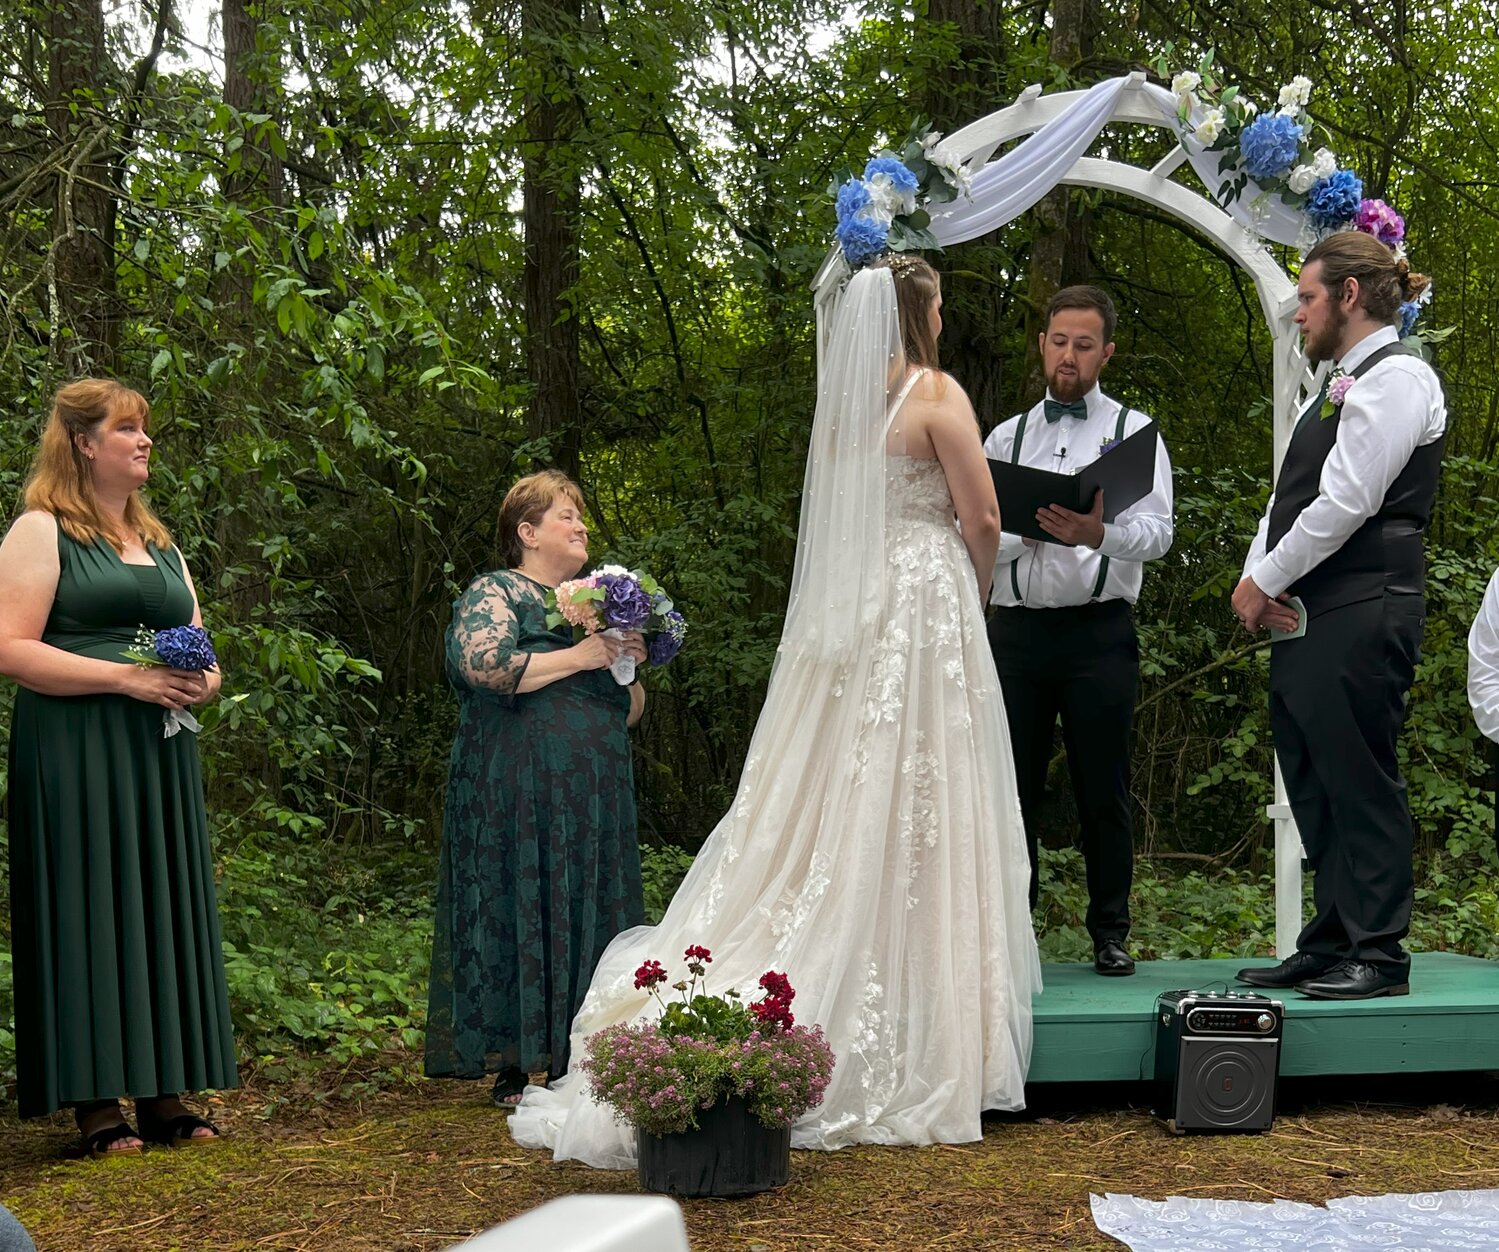 Chronicle columnist Julie McDonald, second from left, looks toward her daughter, Nora, and new son-in-law Chase Conaway during their wedding ceremony in August.